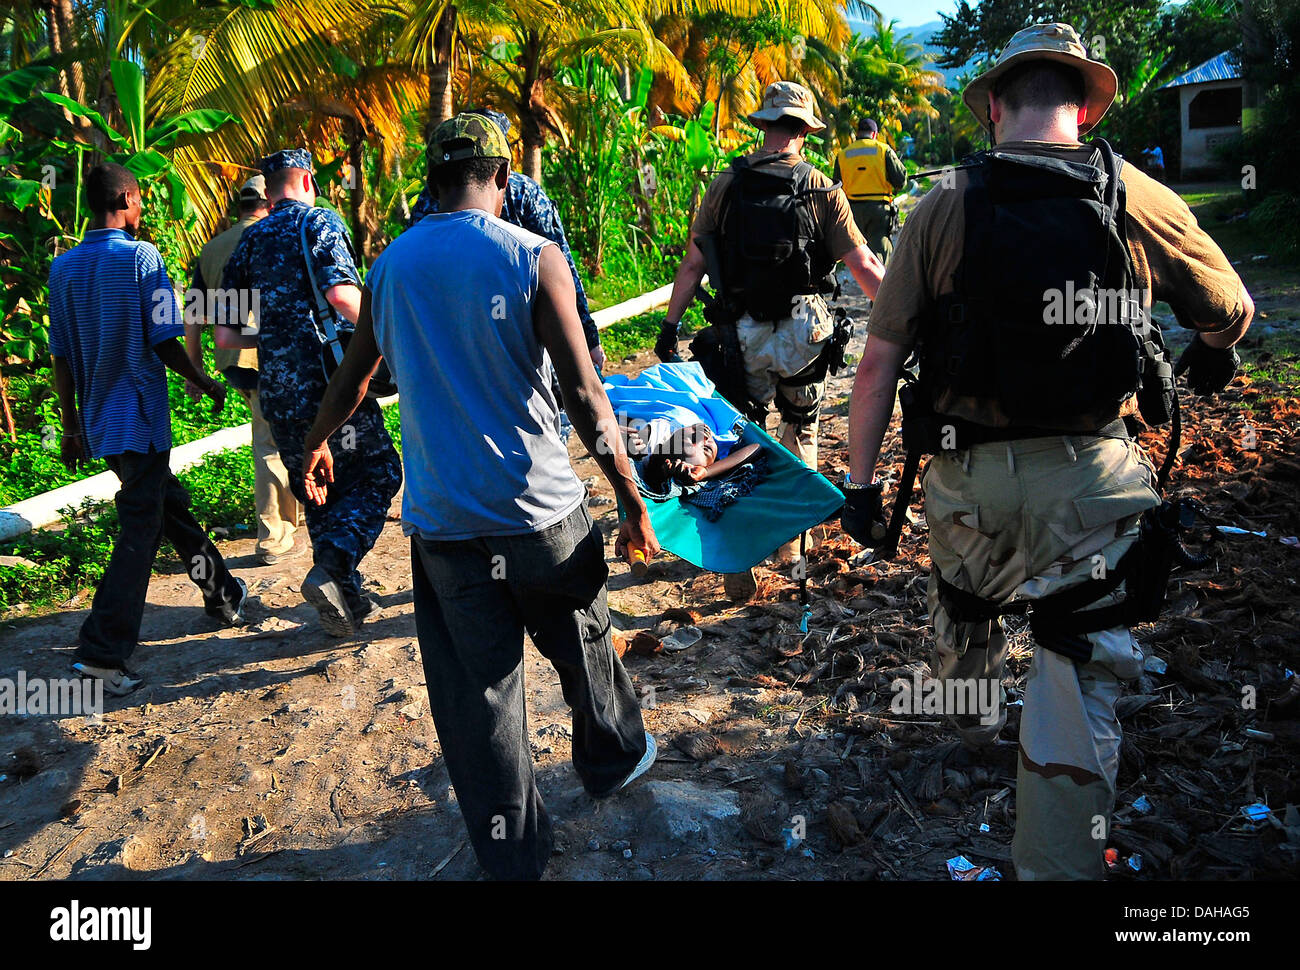 US sailors carry an injured Haitian girl for a medical evacuation in the aftermath of a massive earthquake that killed 220,000 people January 22, 2010 in Port-au-Prince, Haiti. Stock Photo